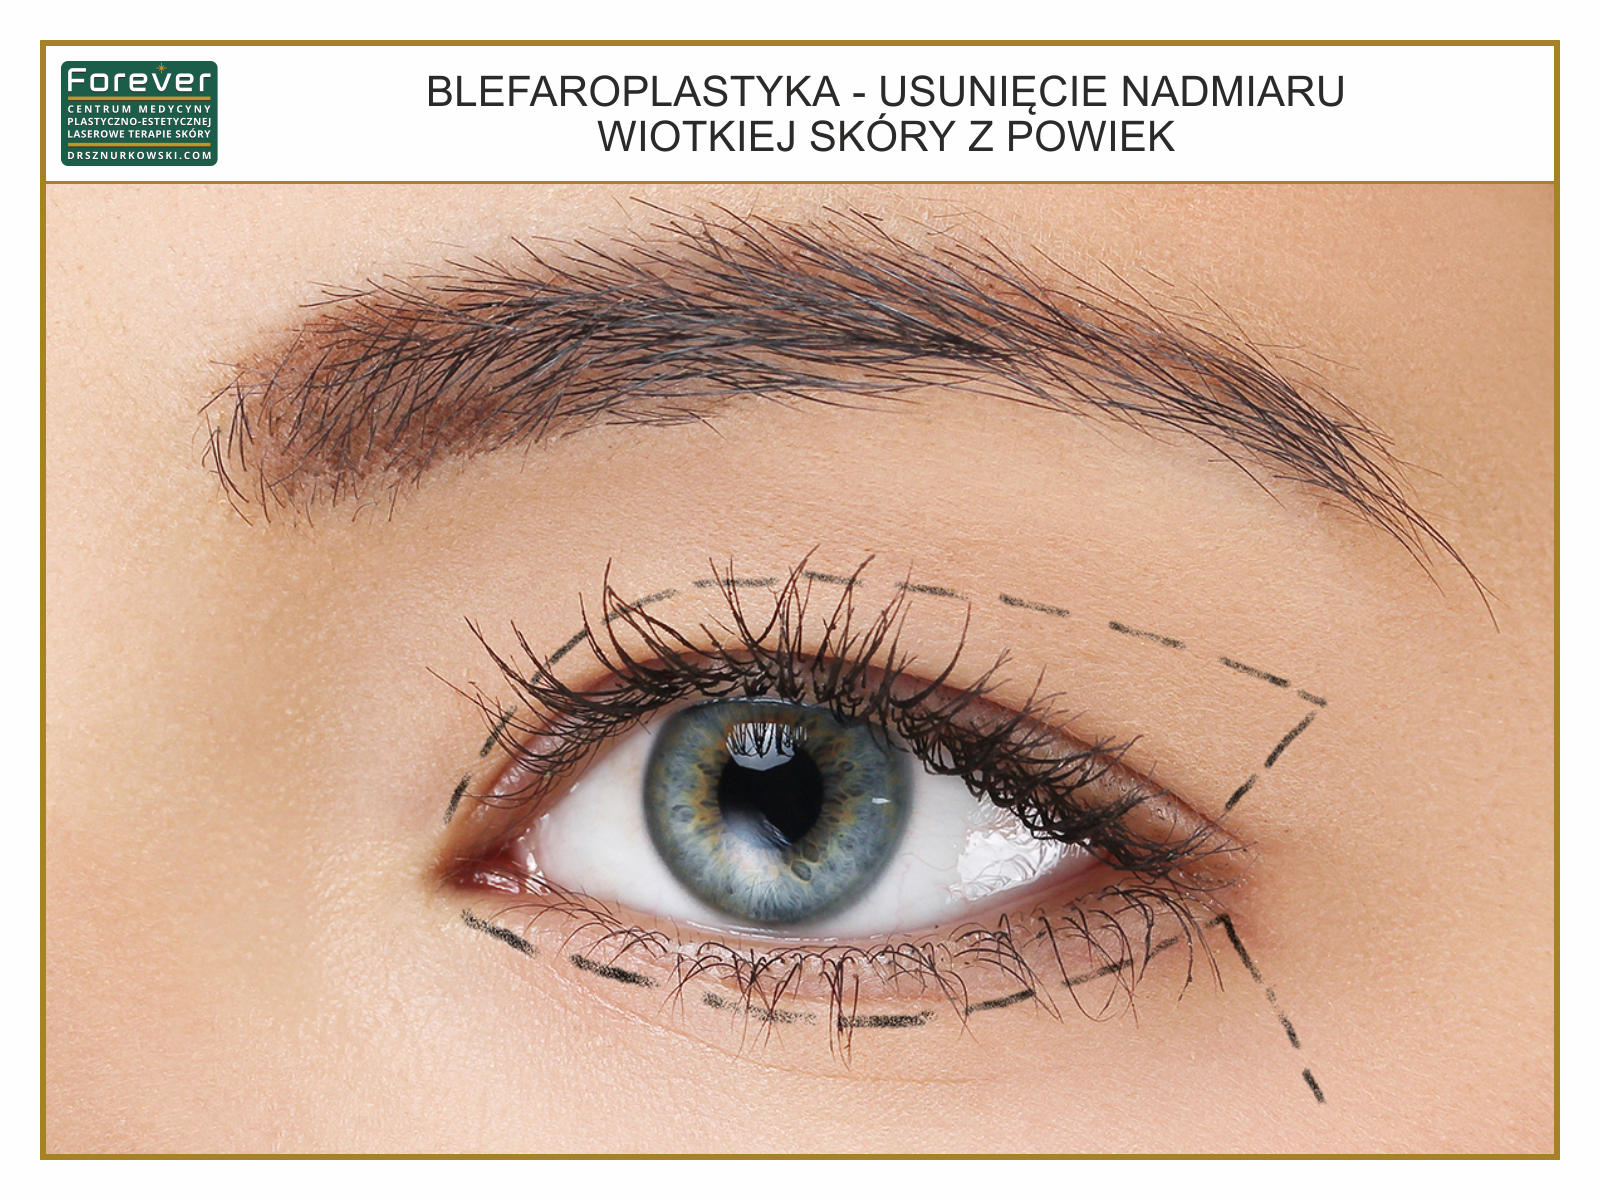 Blepharoplasty - Removing The Excess of Limp Skin From Eyelids 2 (80x60) PL.jpg